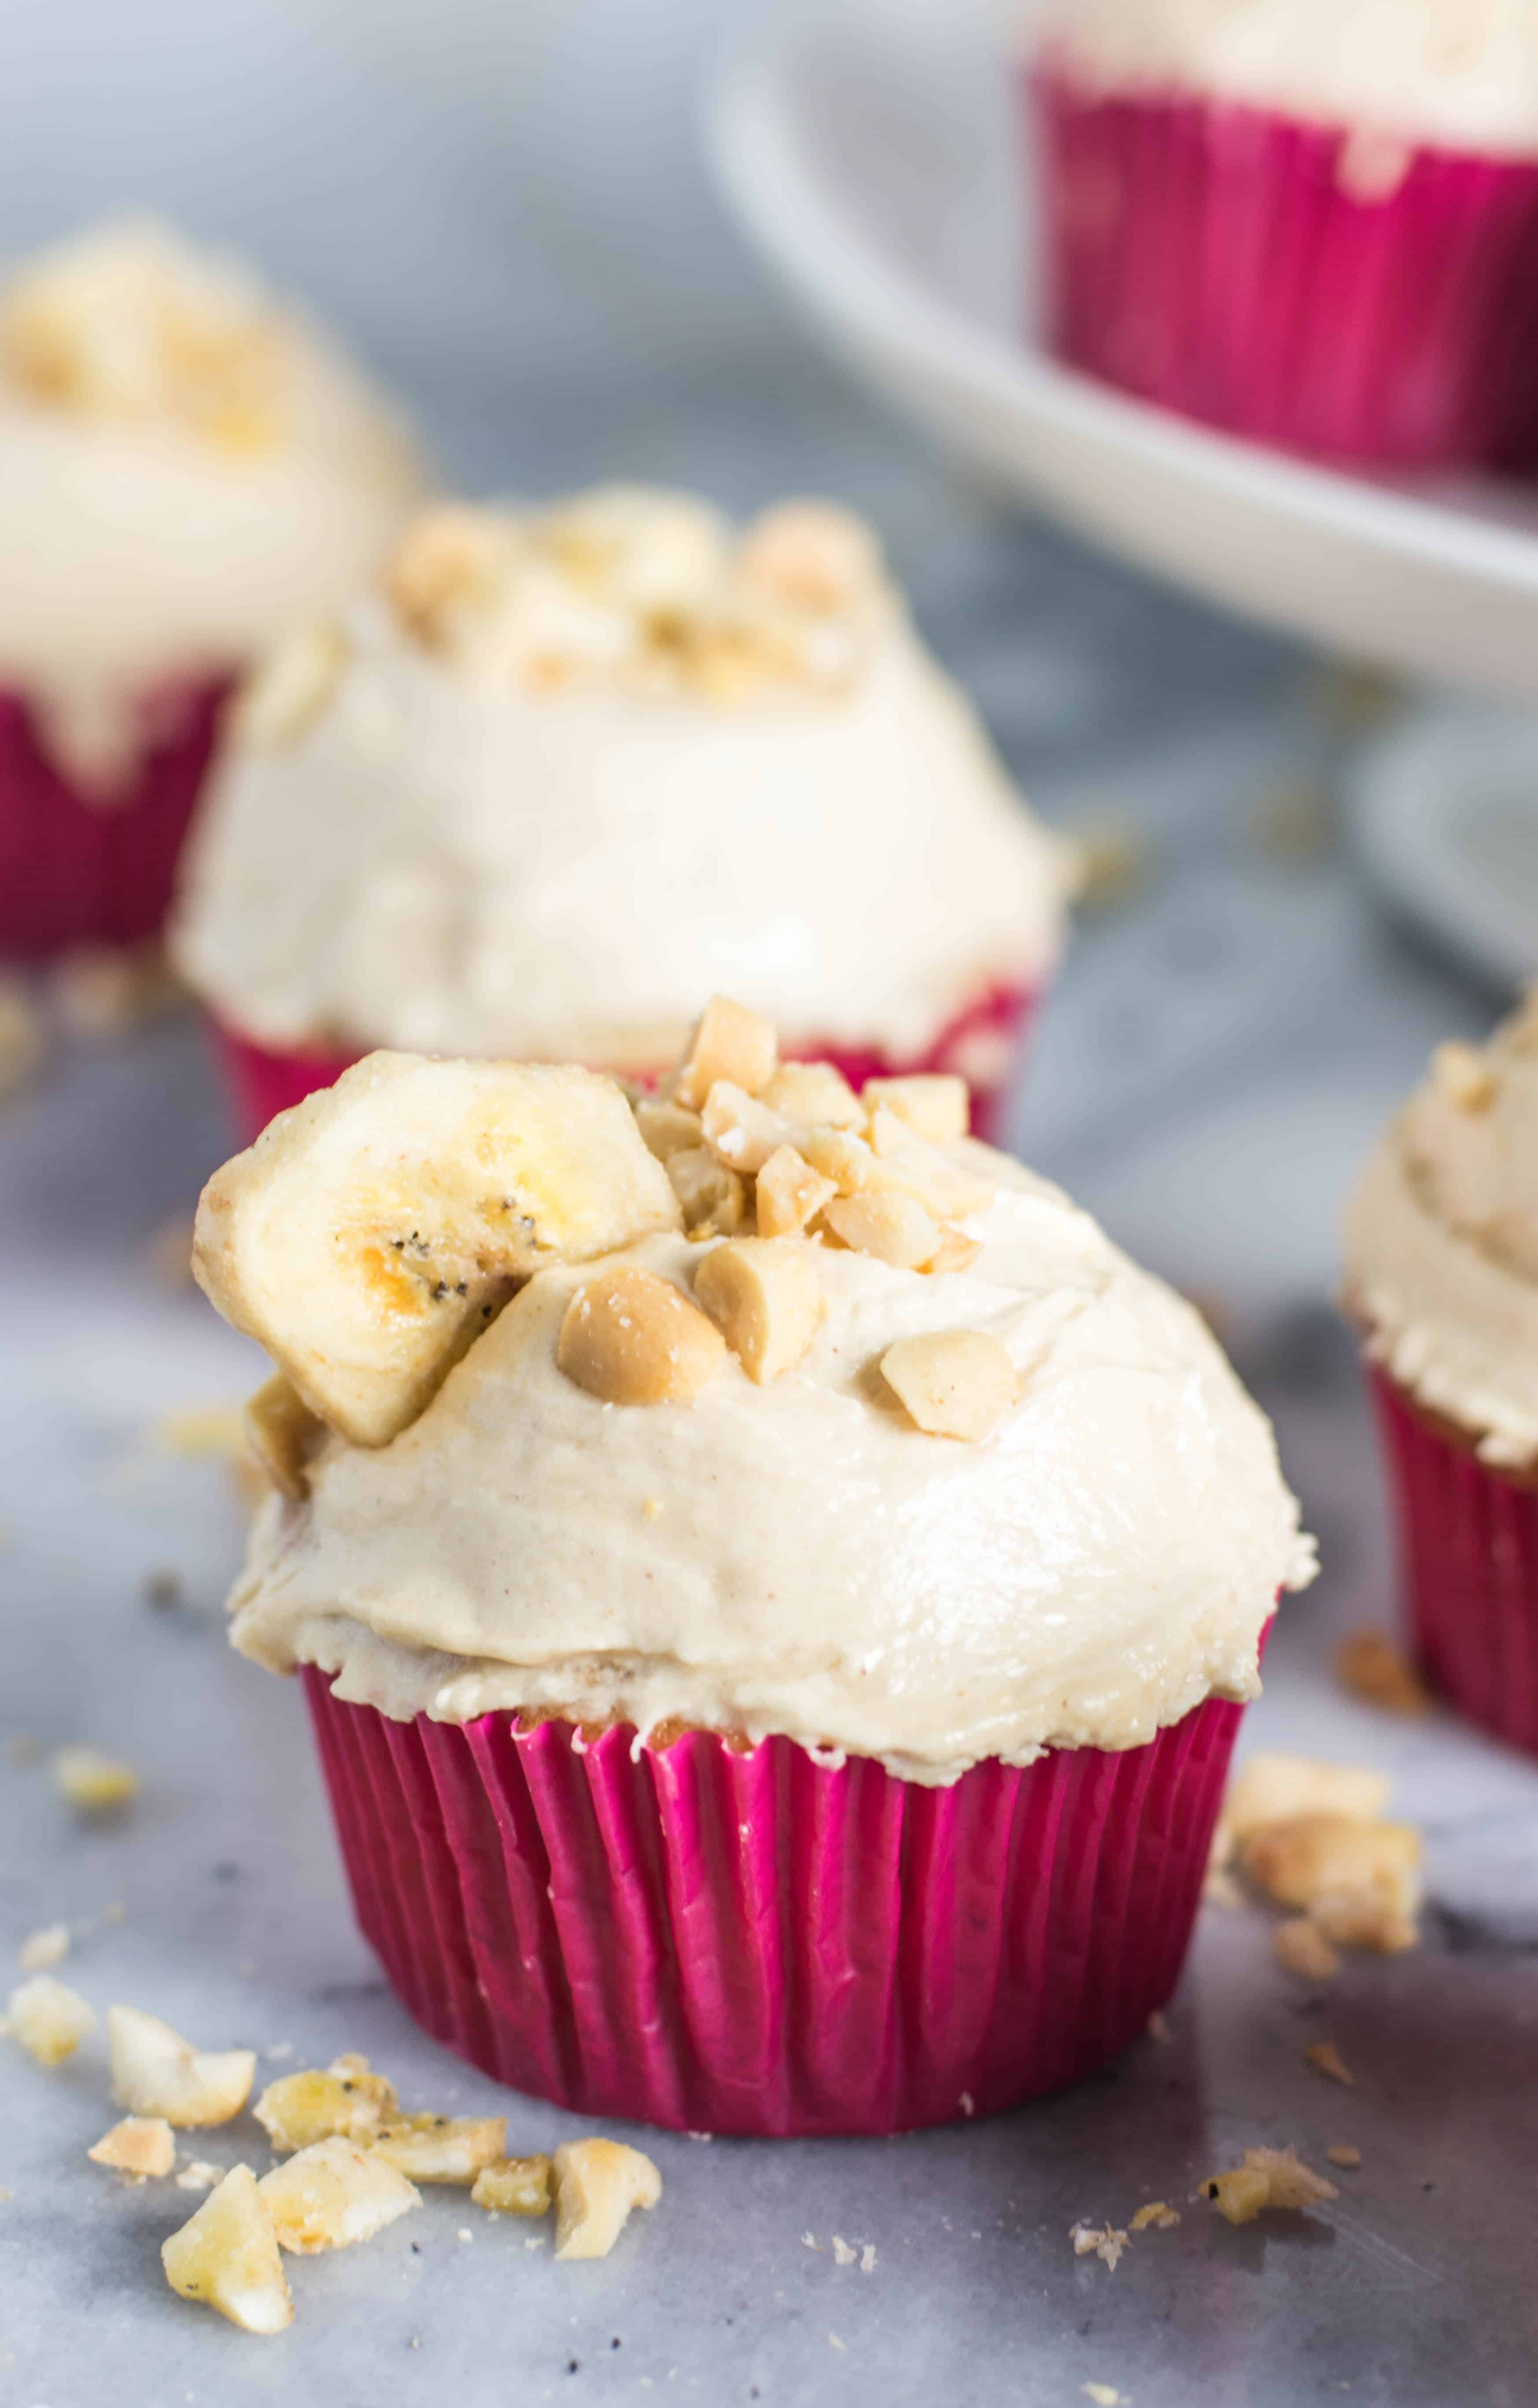 Banana Cupcakes with Peanut Butter Frosting - The Itsy-Bitsy Kitchen